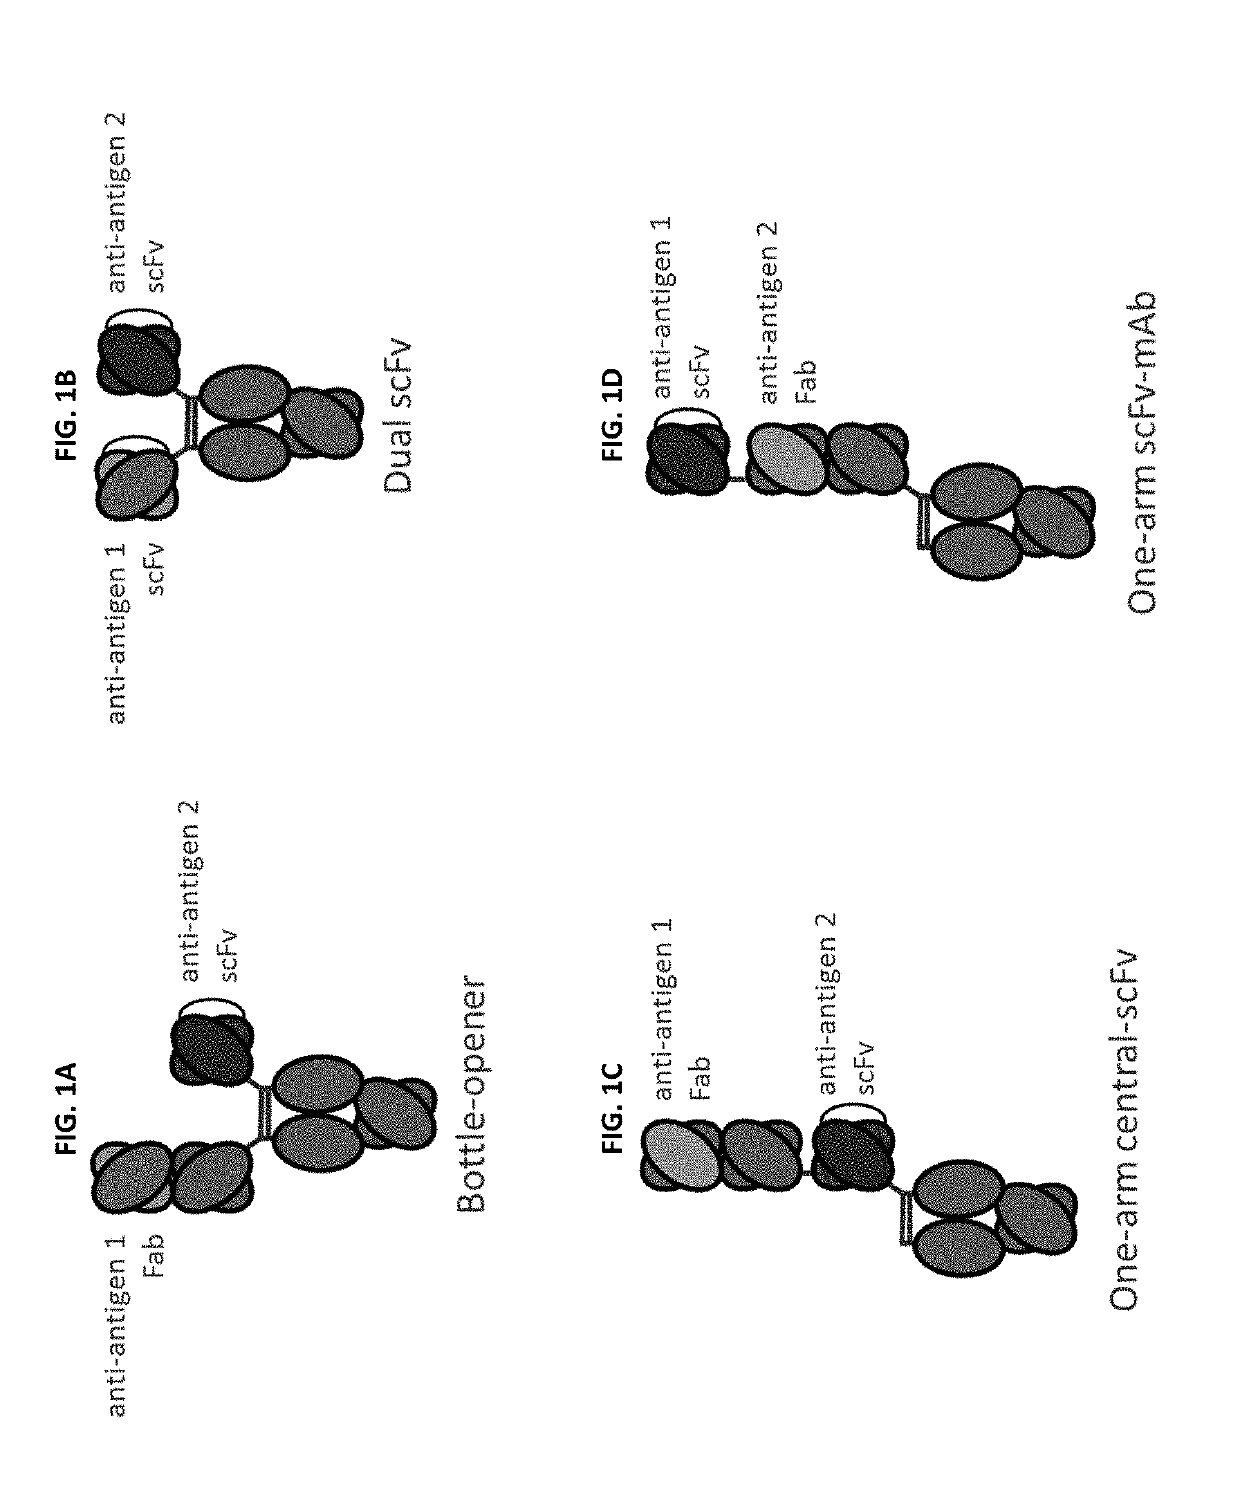 Bispecific and monospecific antibodies using novel Anti-pd-1 sequences